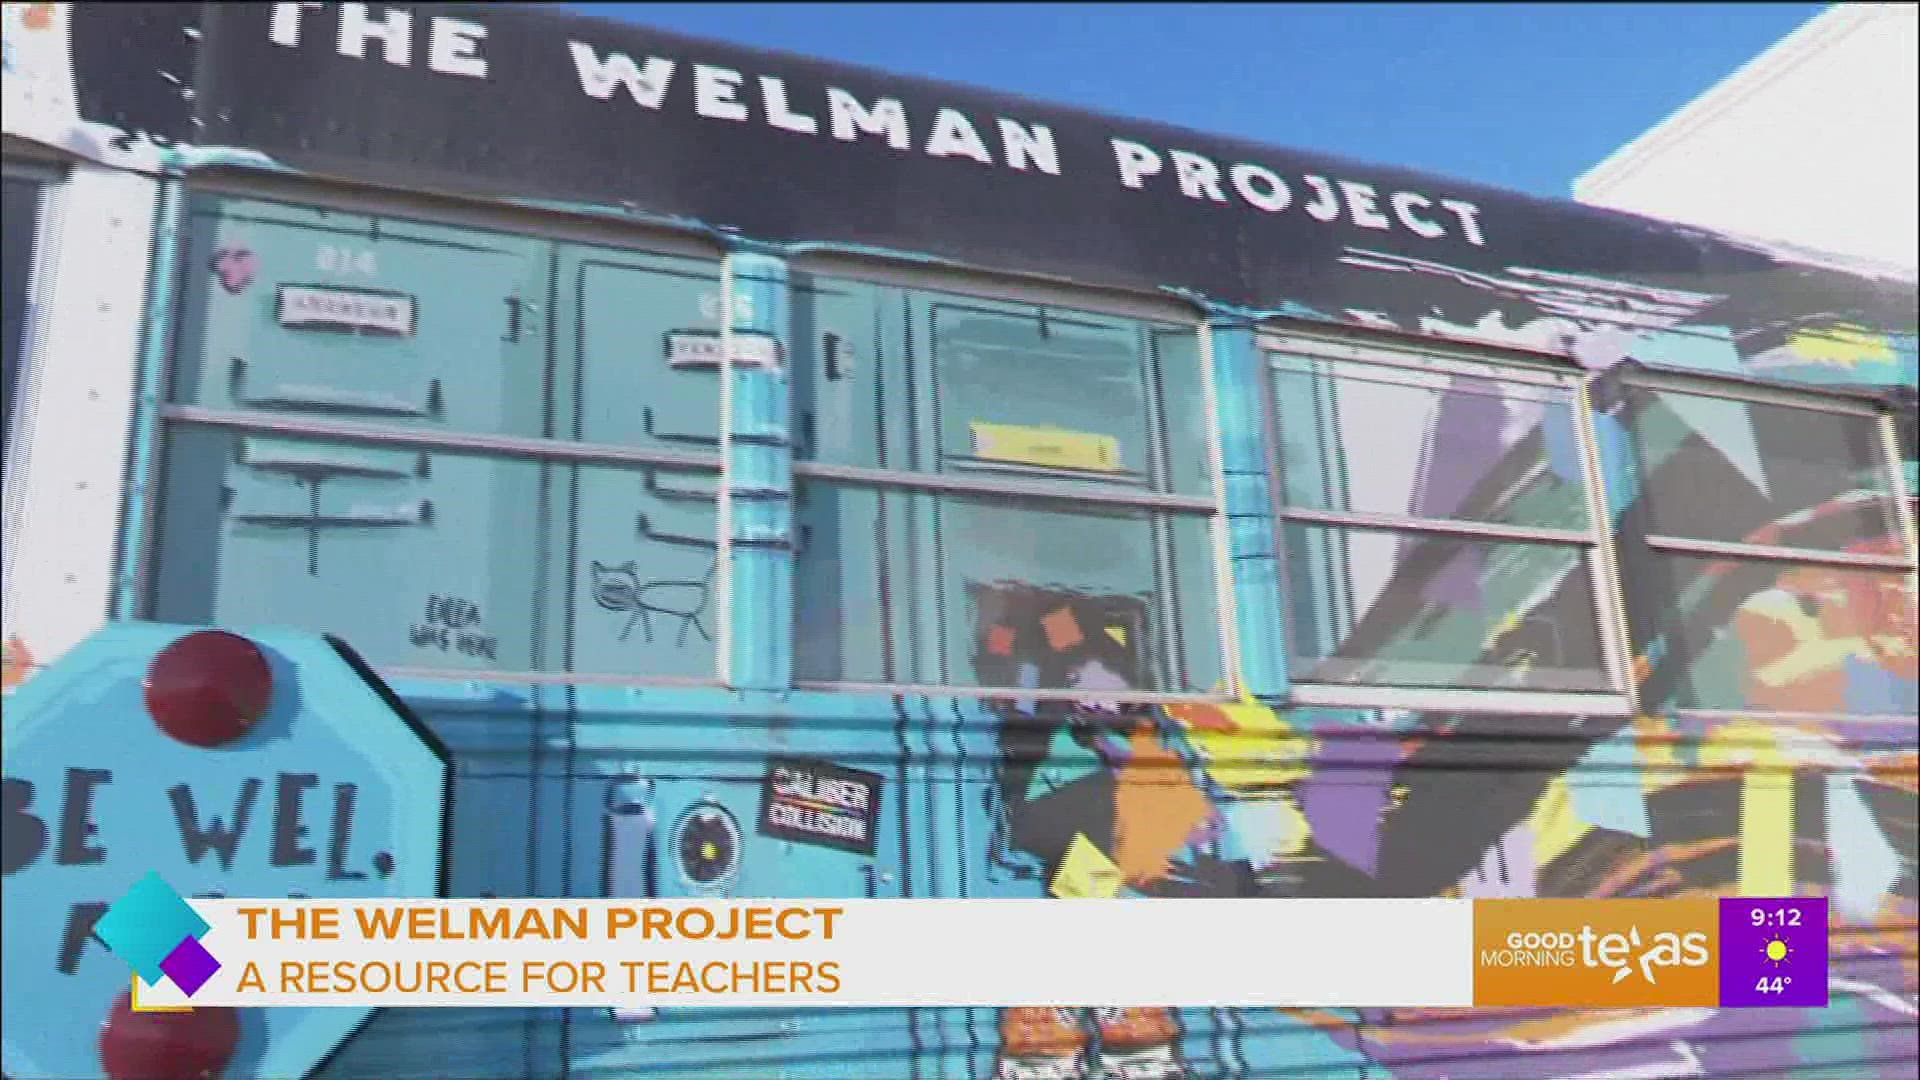 Fort Worth’s Welman Project provides teaching resources for teachers using ENTIRELY recycled goods or donated items, and Paige is giving us a sneak peak!